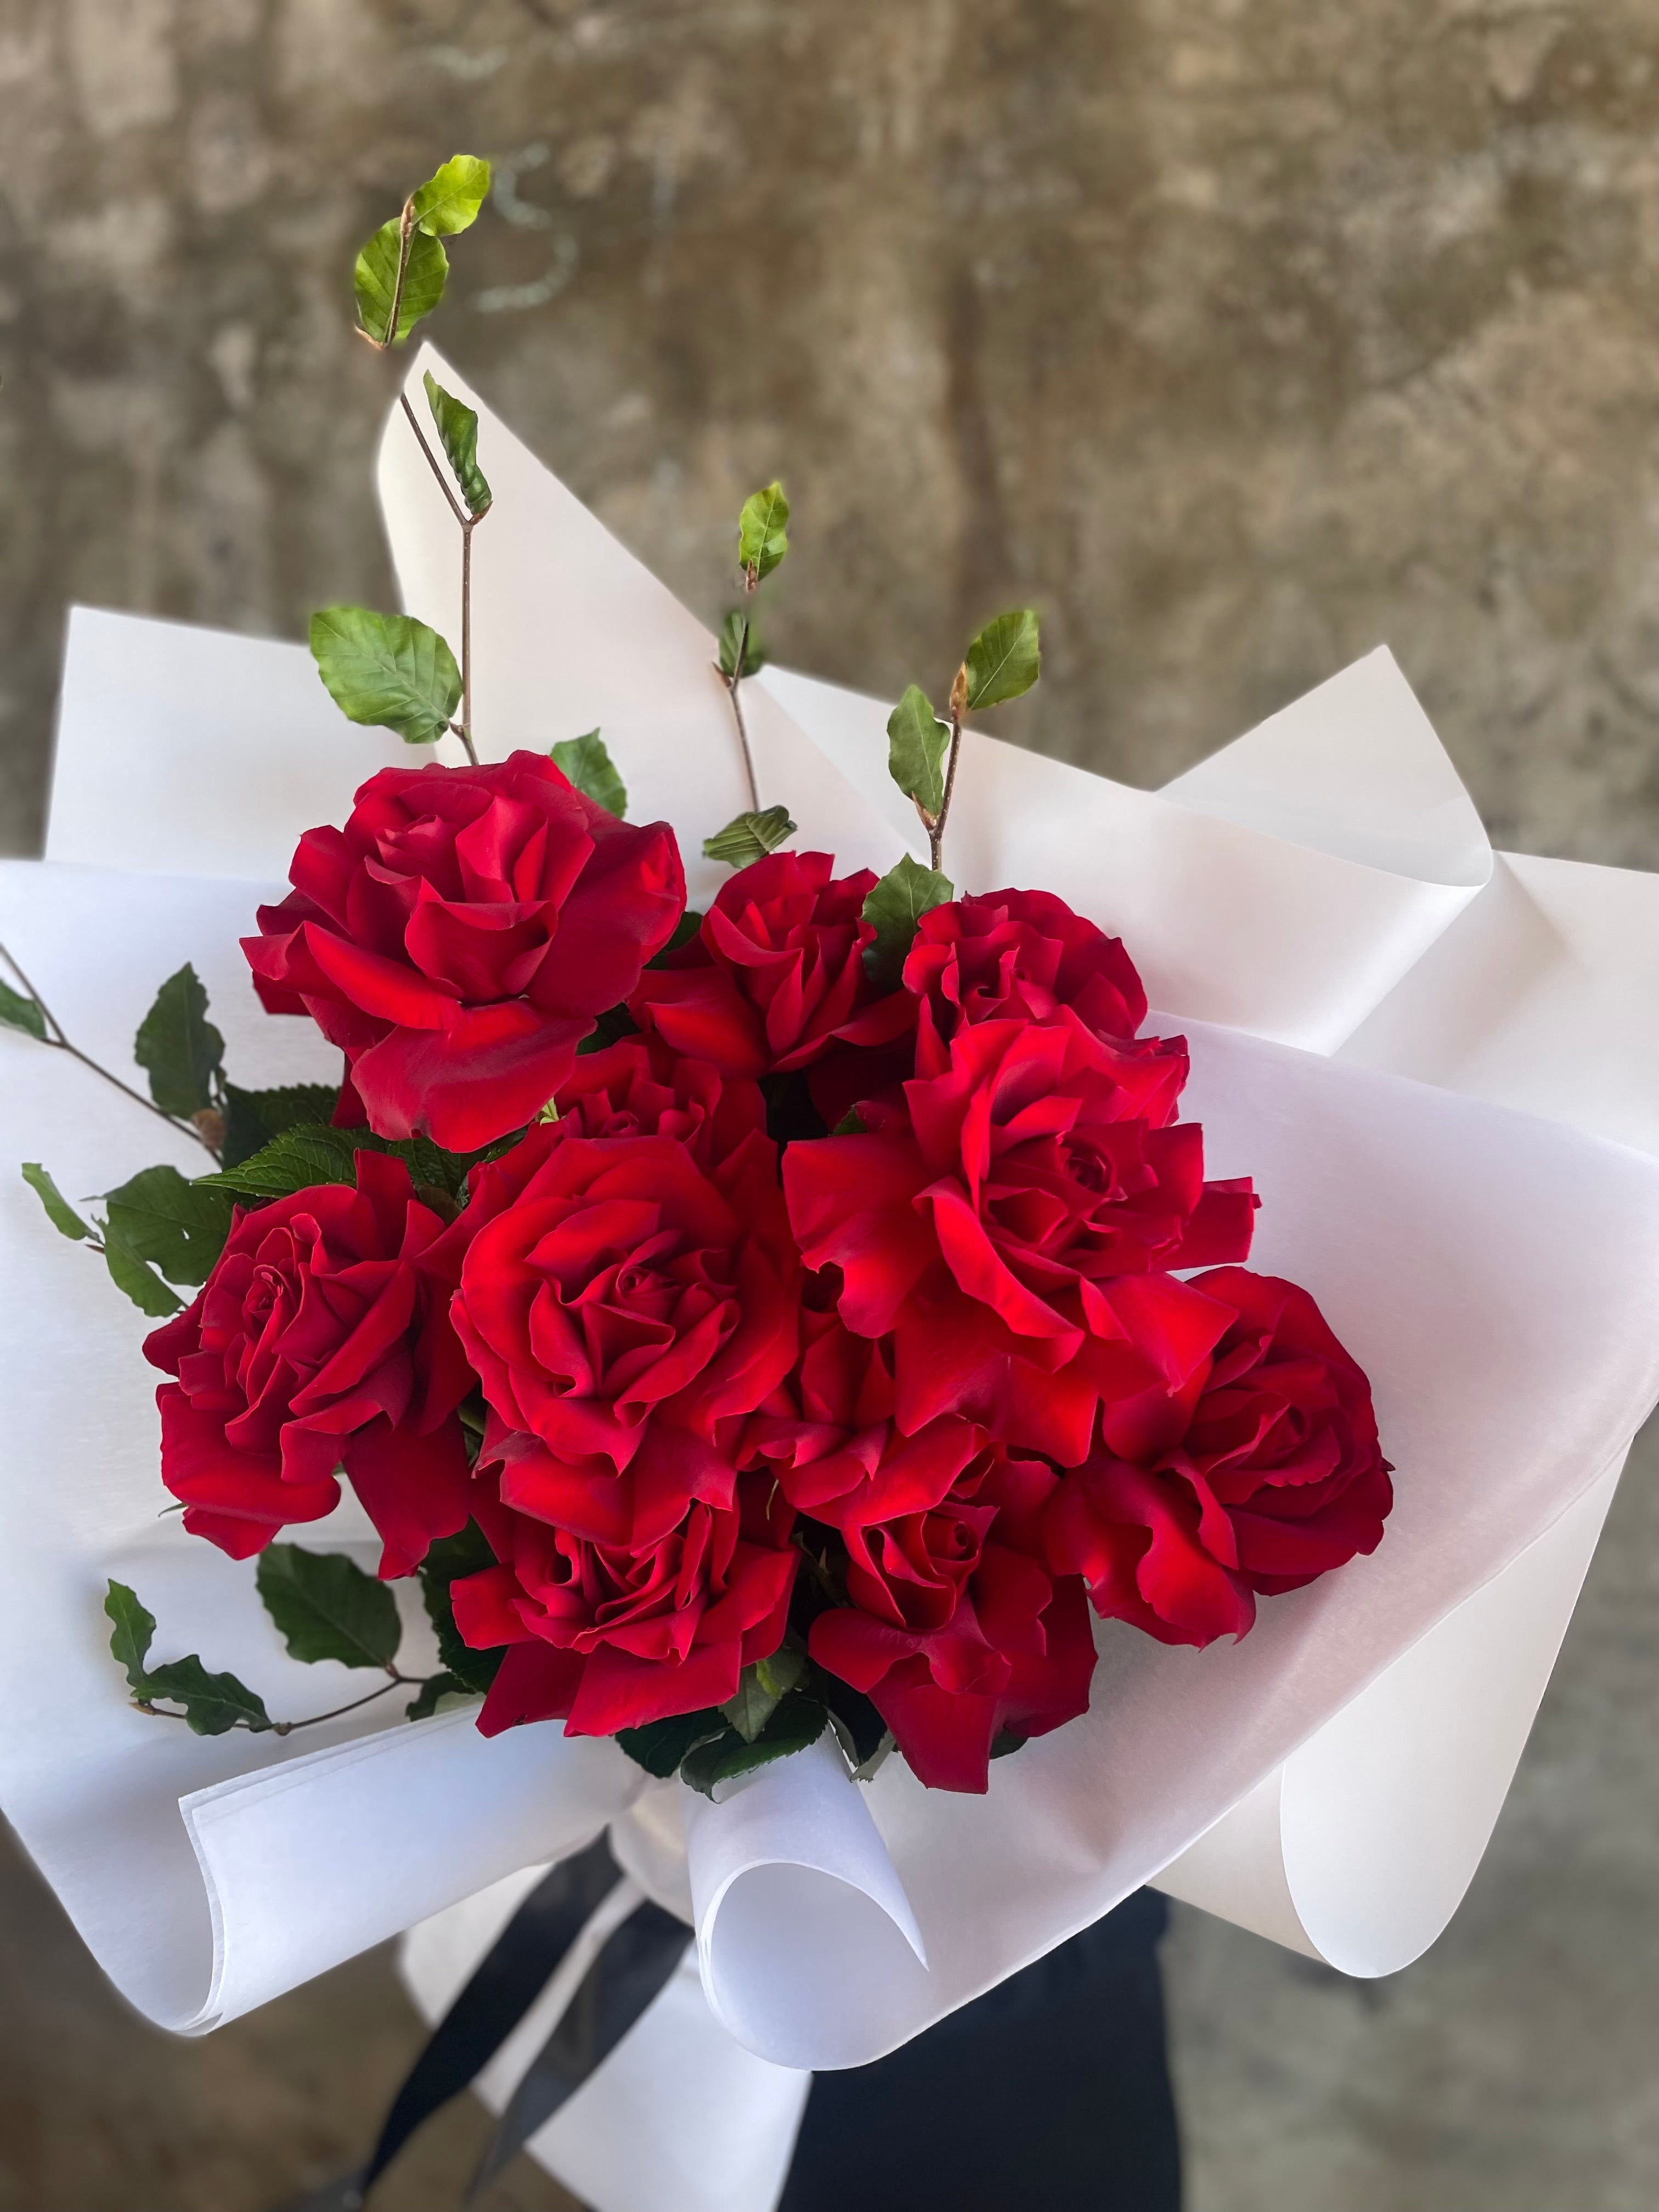 Close up image of 1 dozen red rose bouquet, wrapped in white signature style. Florist holding bouquet in front of concrete wall.